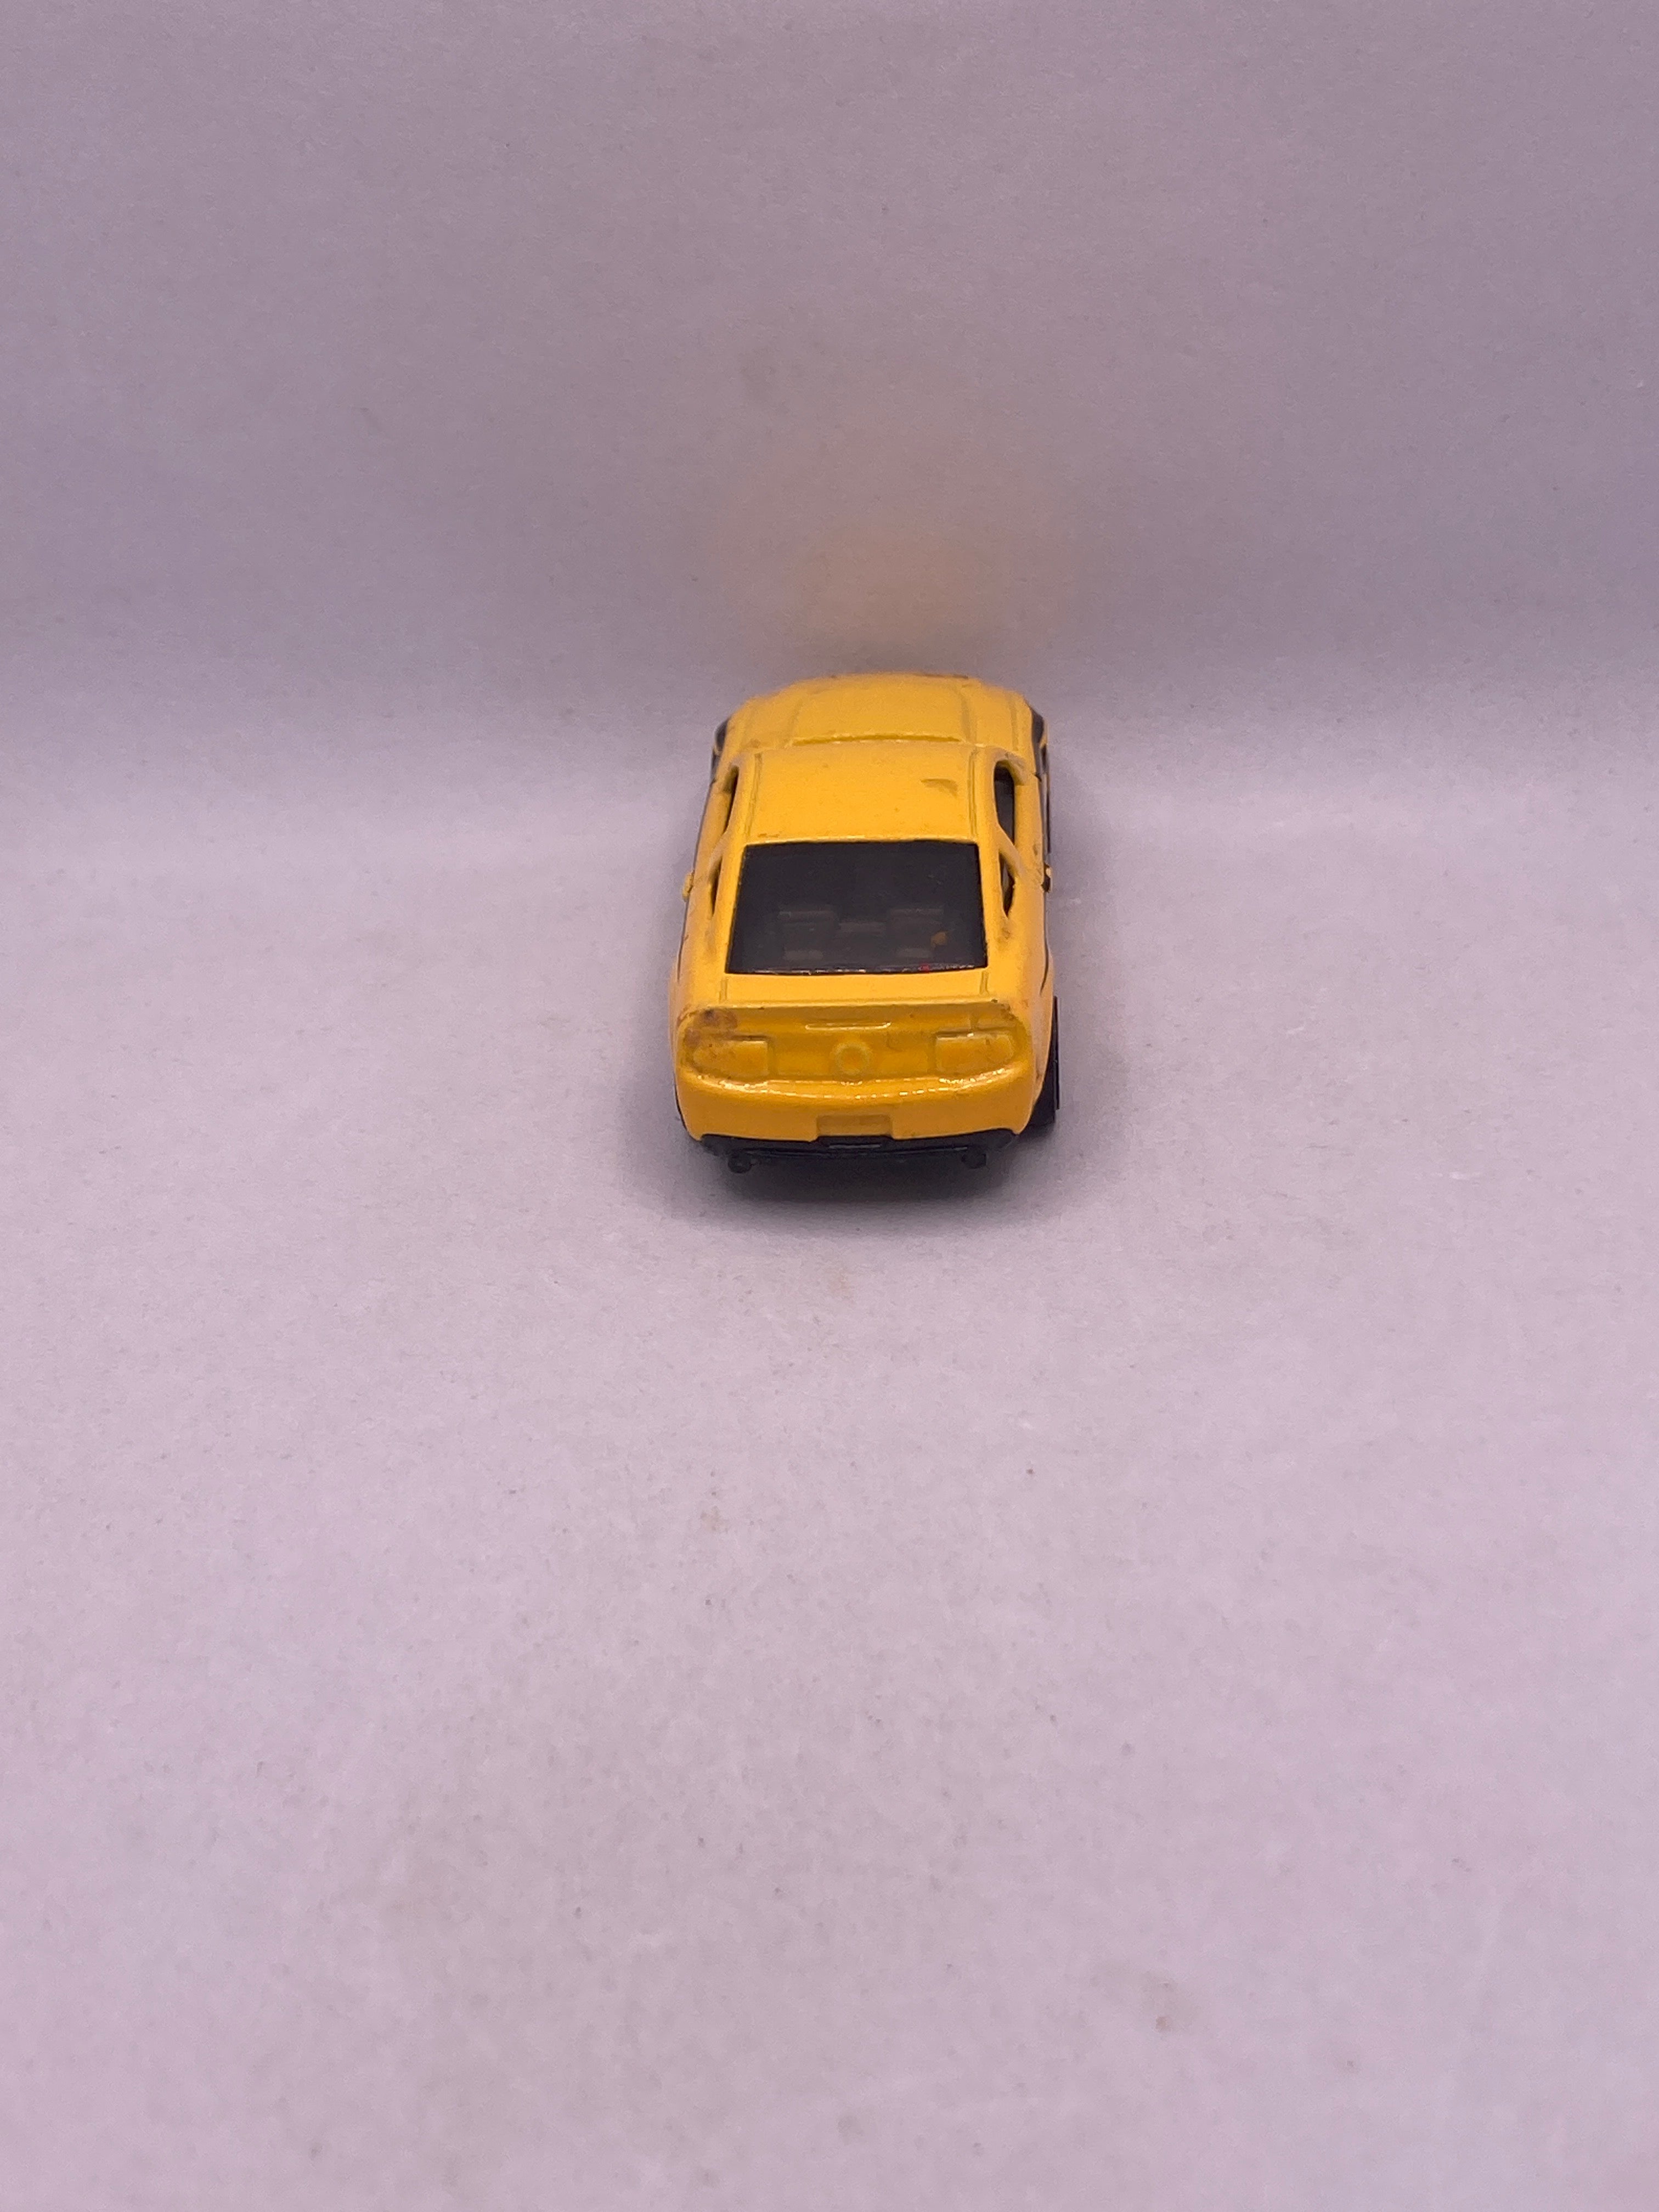 Hot Wheels 2010 Ford Mustang GT Diecast